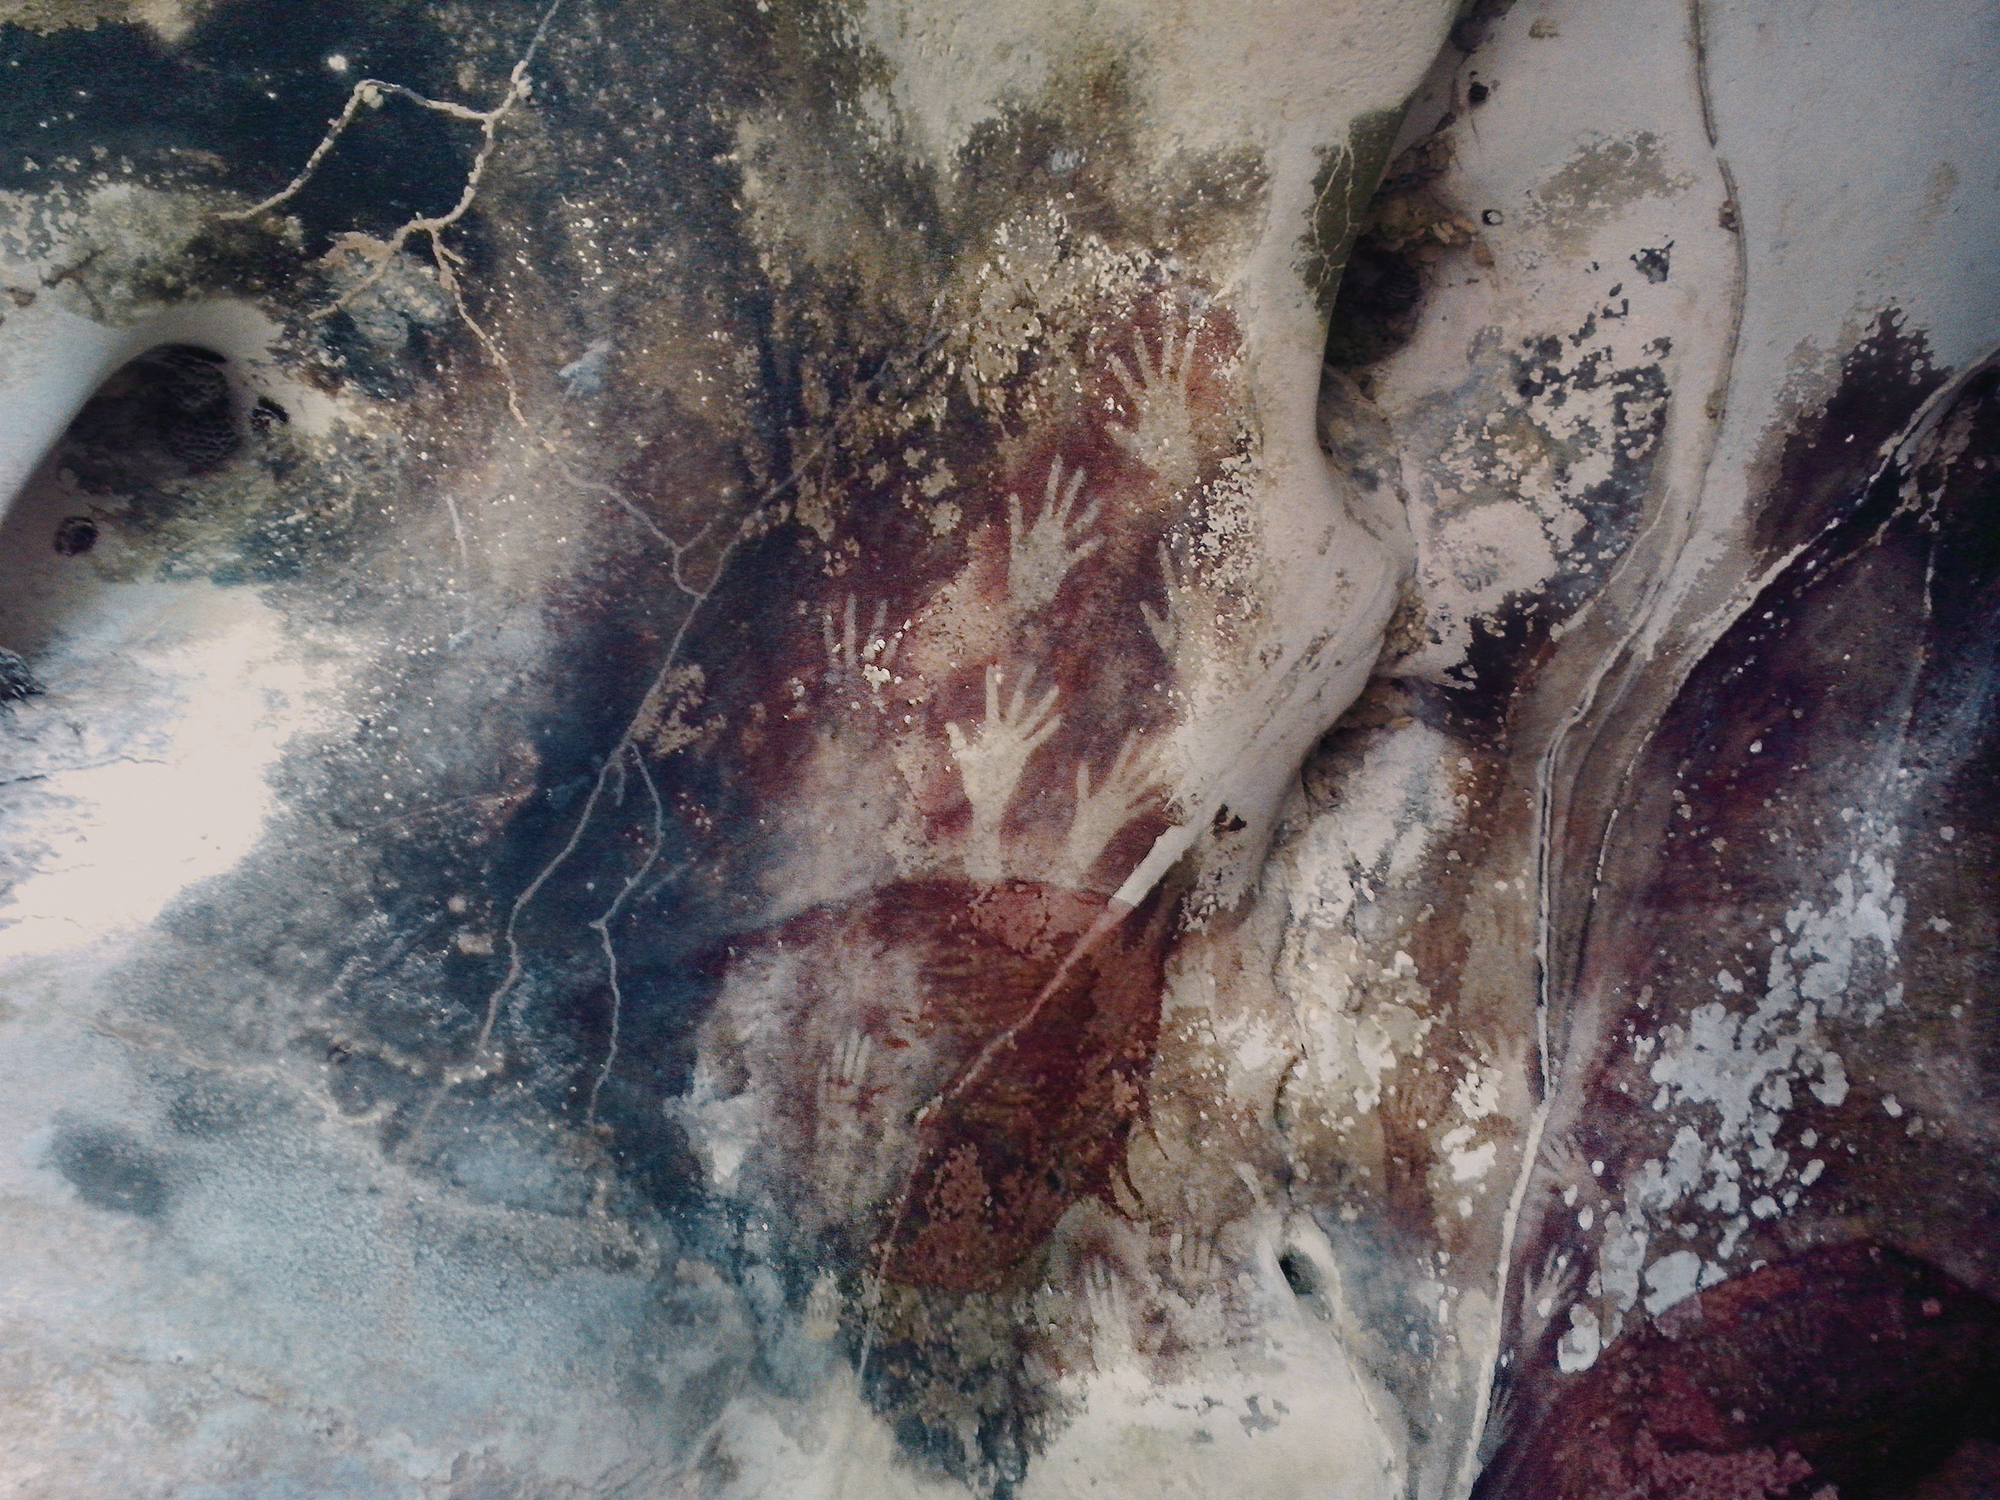 Hands depicted in paintings from the caves in the Maros-Pangkep karst Archaeology